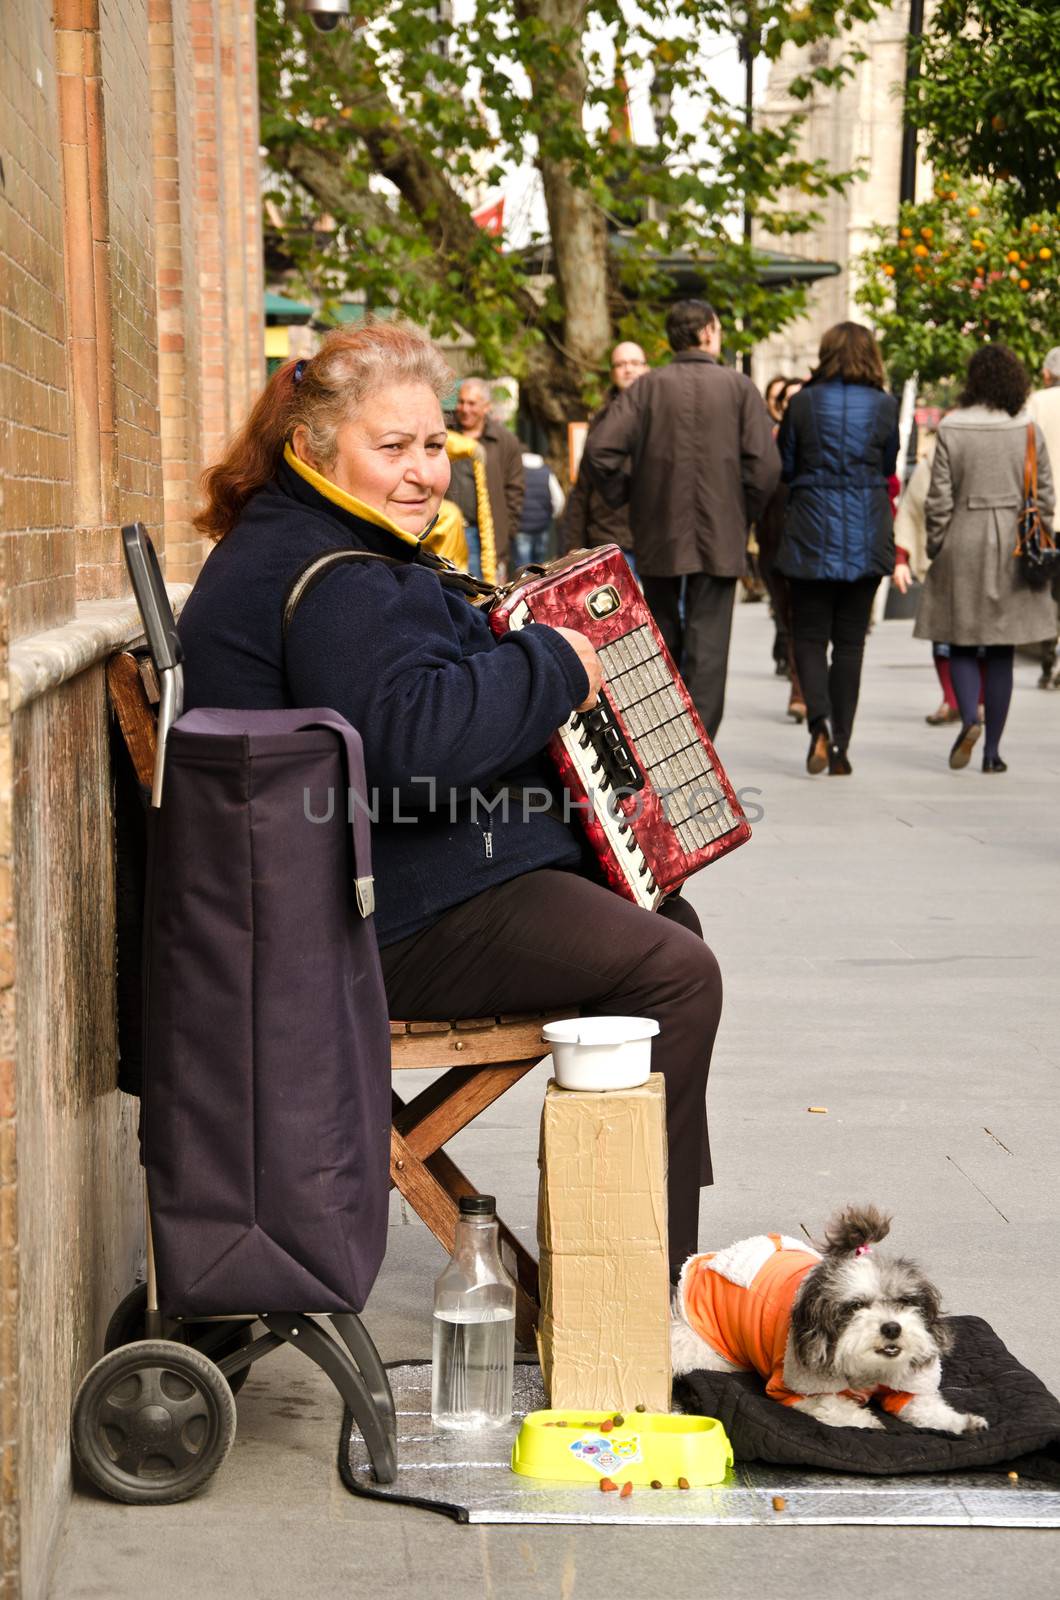 Lady with accordion, Seville Spain. by lauria